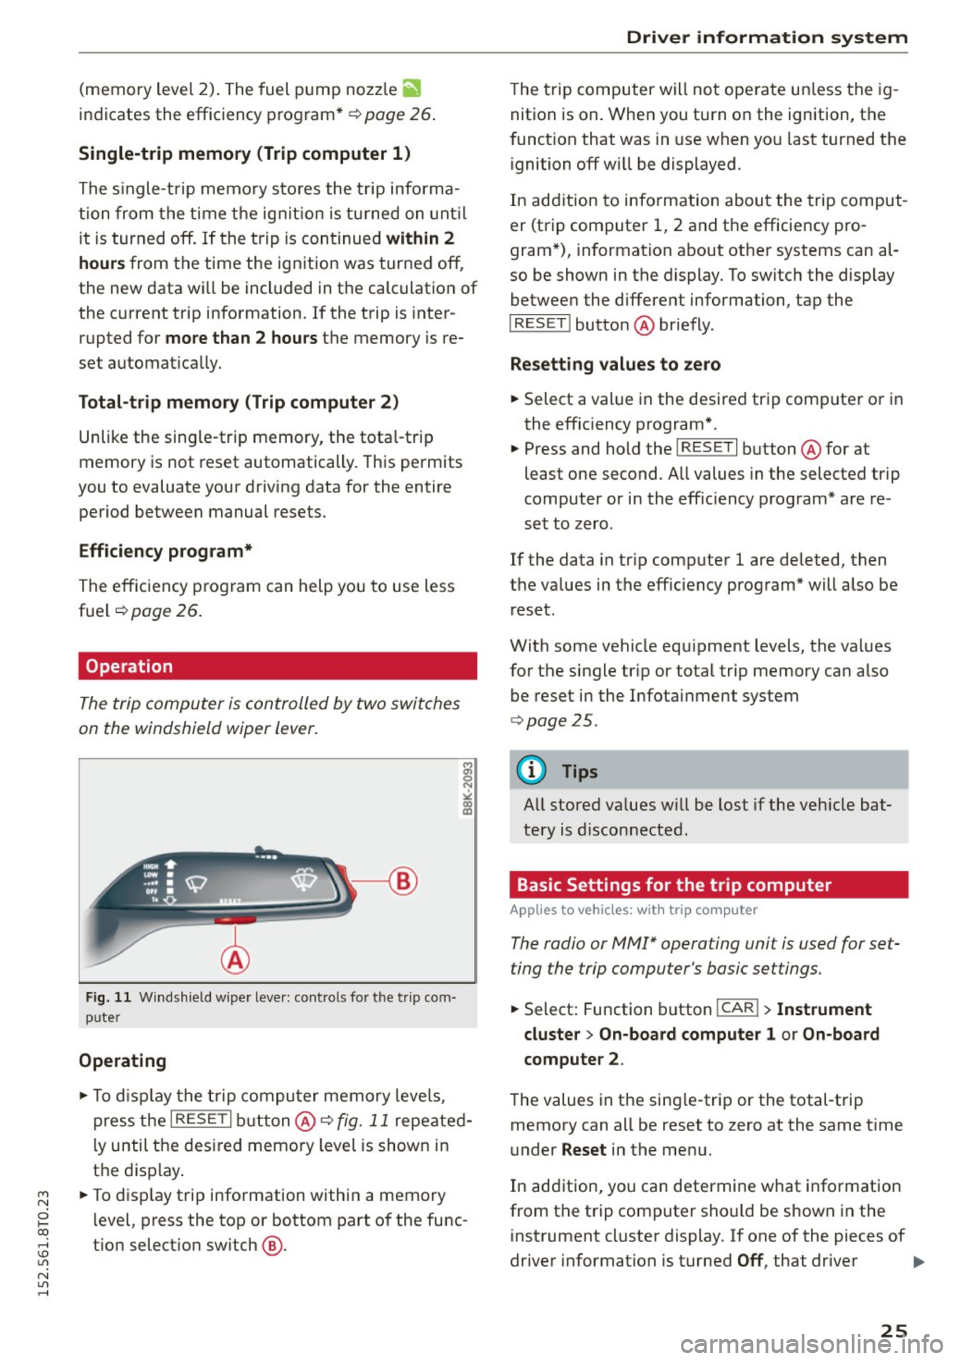 AUDI A5 2015  Owner´s Manual M N 
i? co ,...., \!) 1.11 
N 1.11 ,...., 
(memory  level  2). The fuel  pump  nozz le iii 
indicates  the  efficiency  program*¢ page 26. 
Single-t rip memory  (Trip  computer  1 ) 
The single -t 